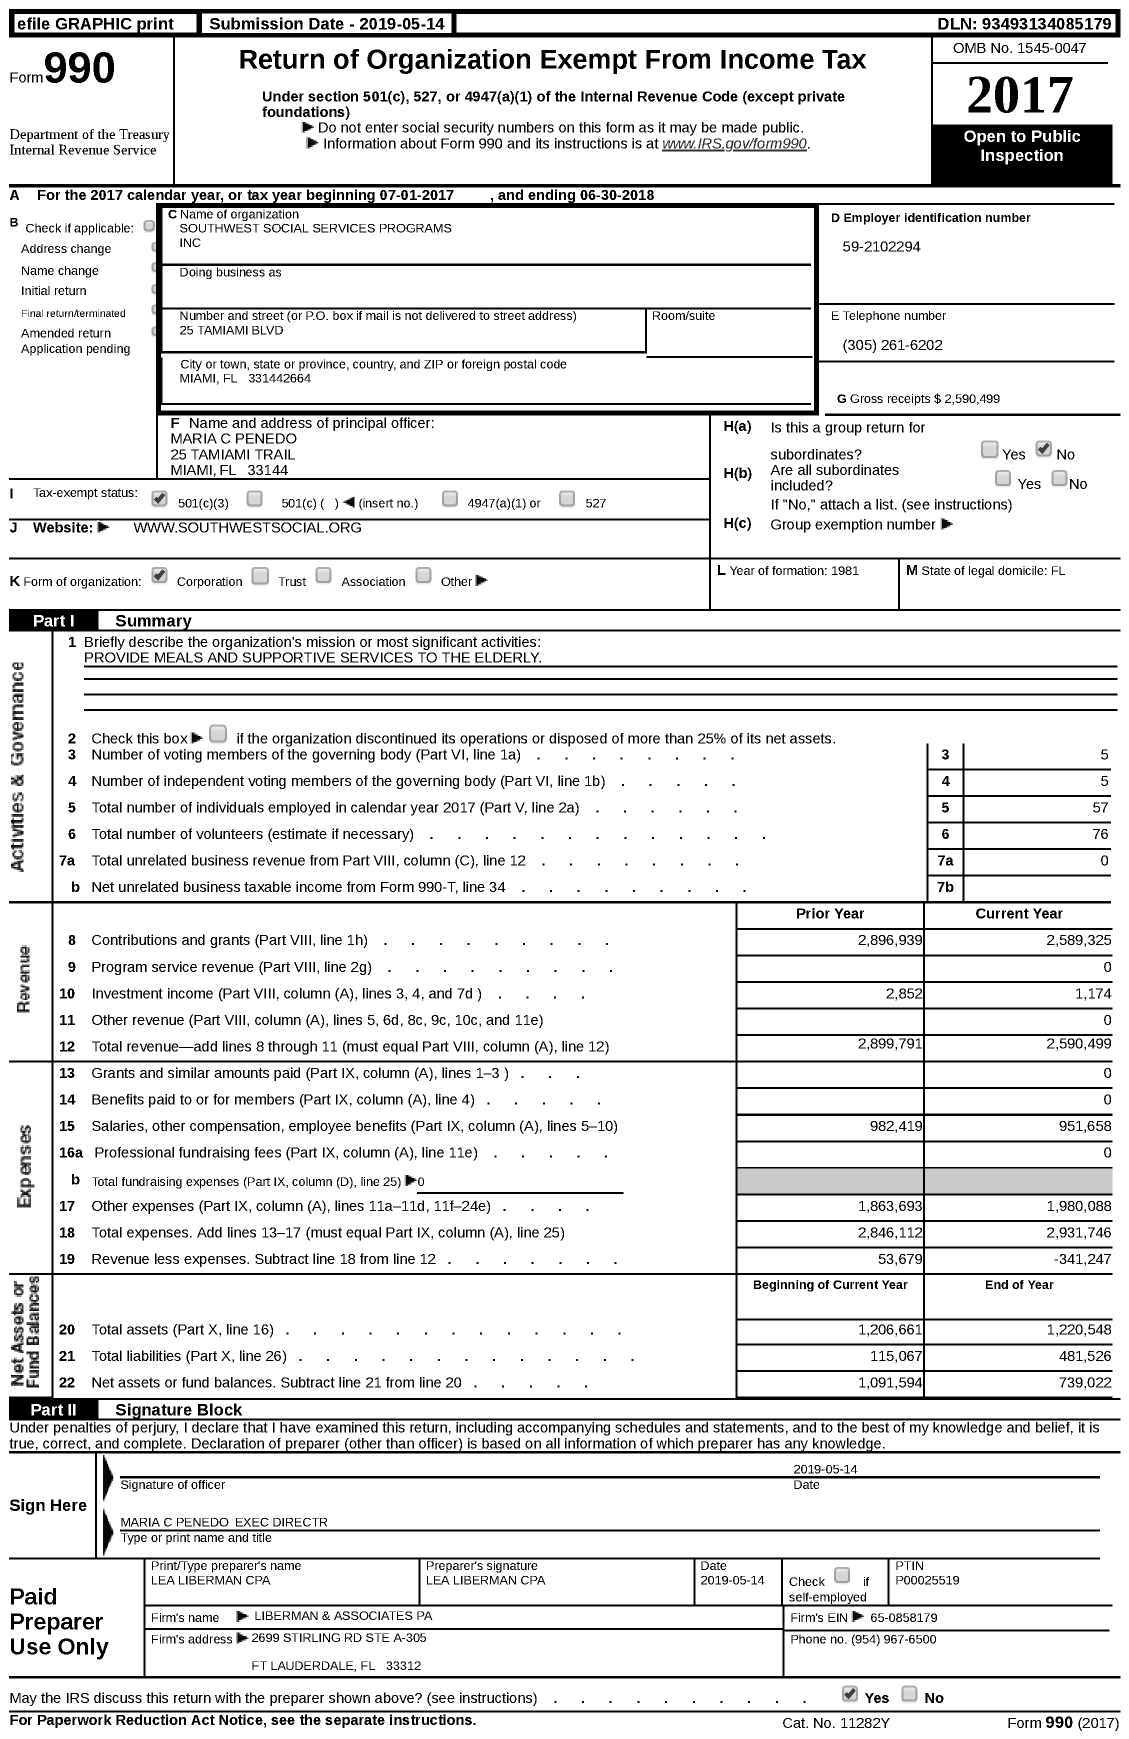 Image of first page of 2017 Form 990 for Southwest Social Services Programs